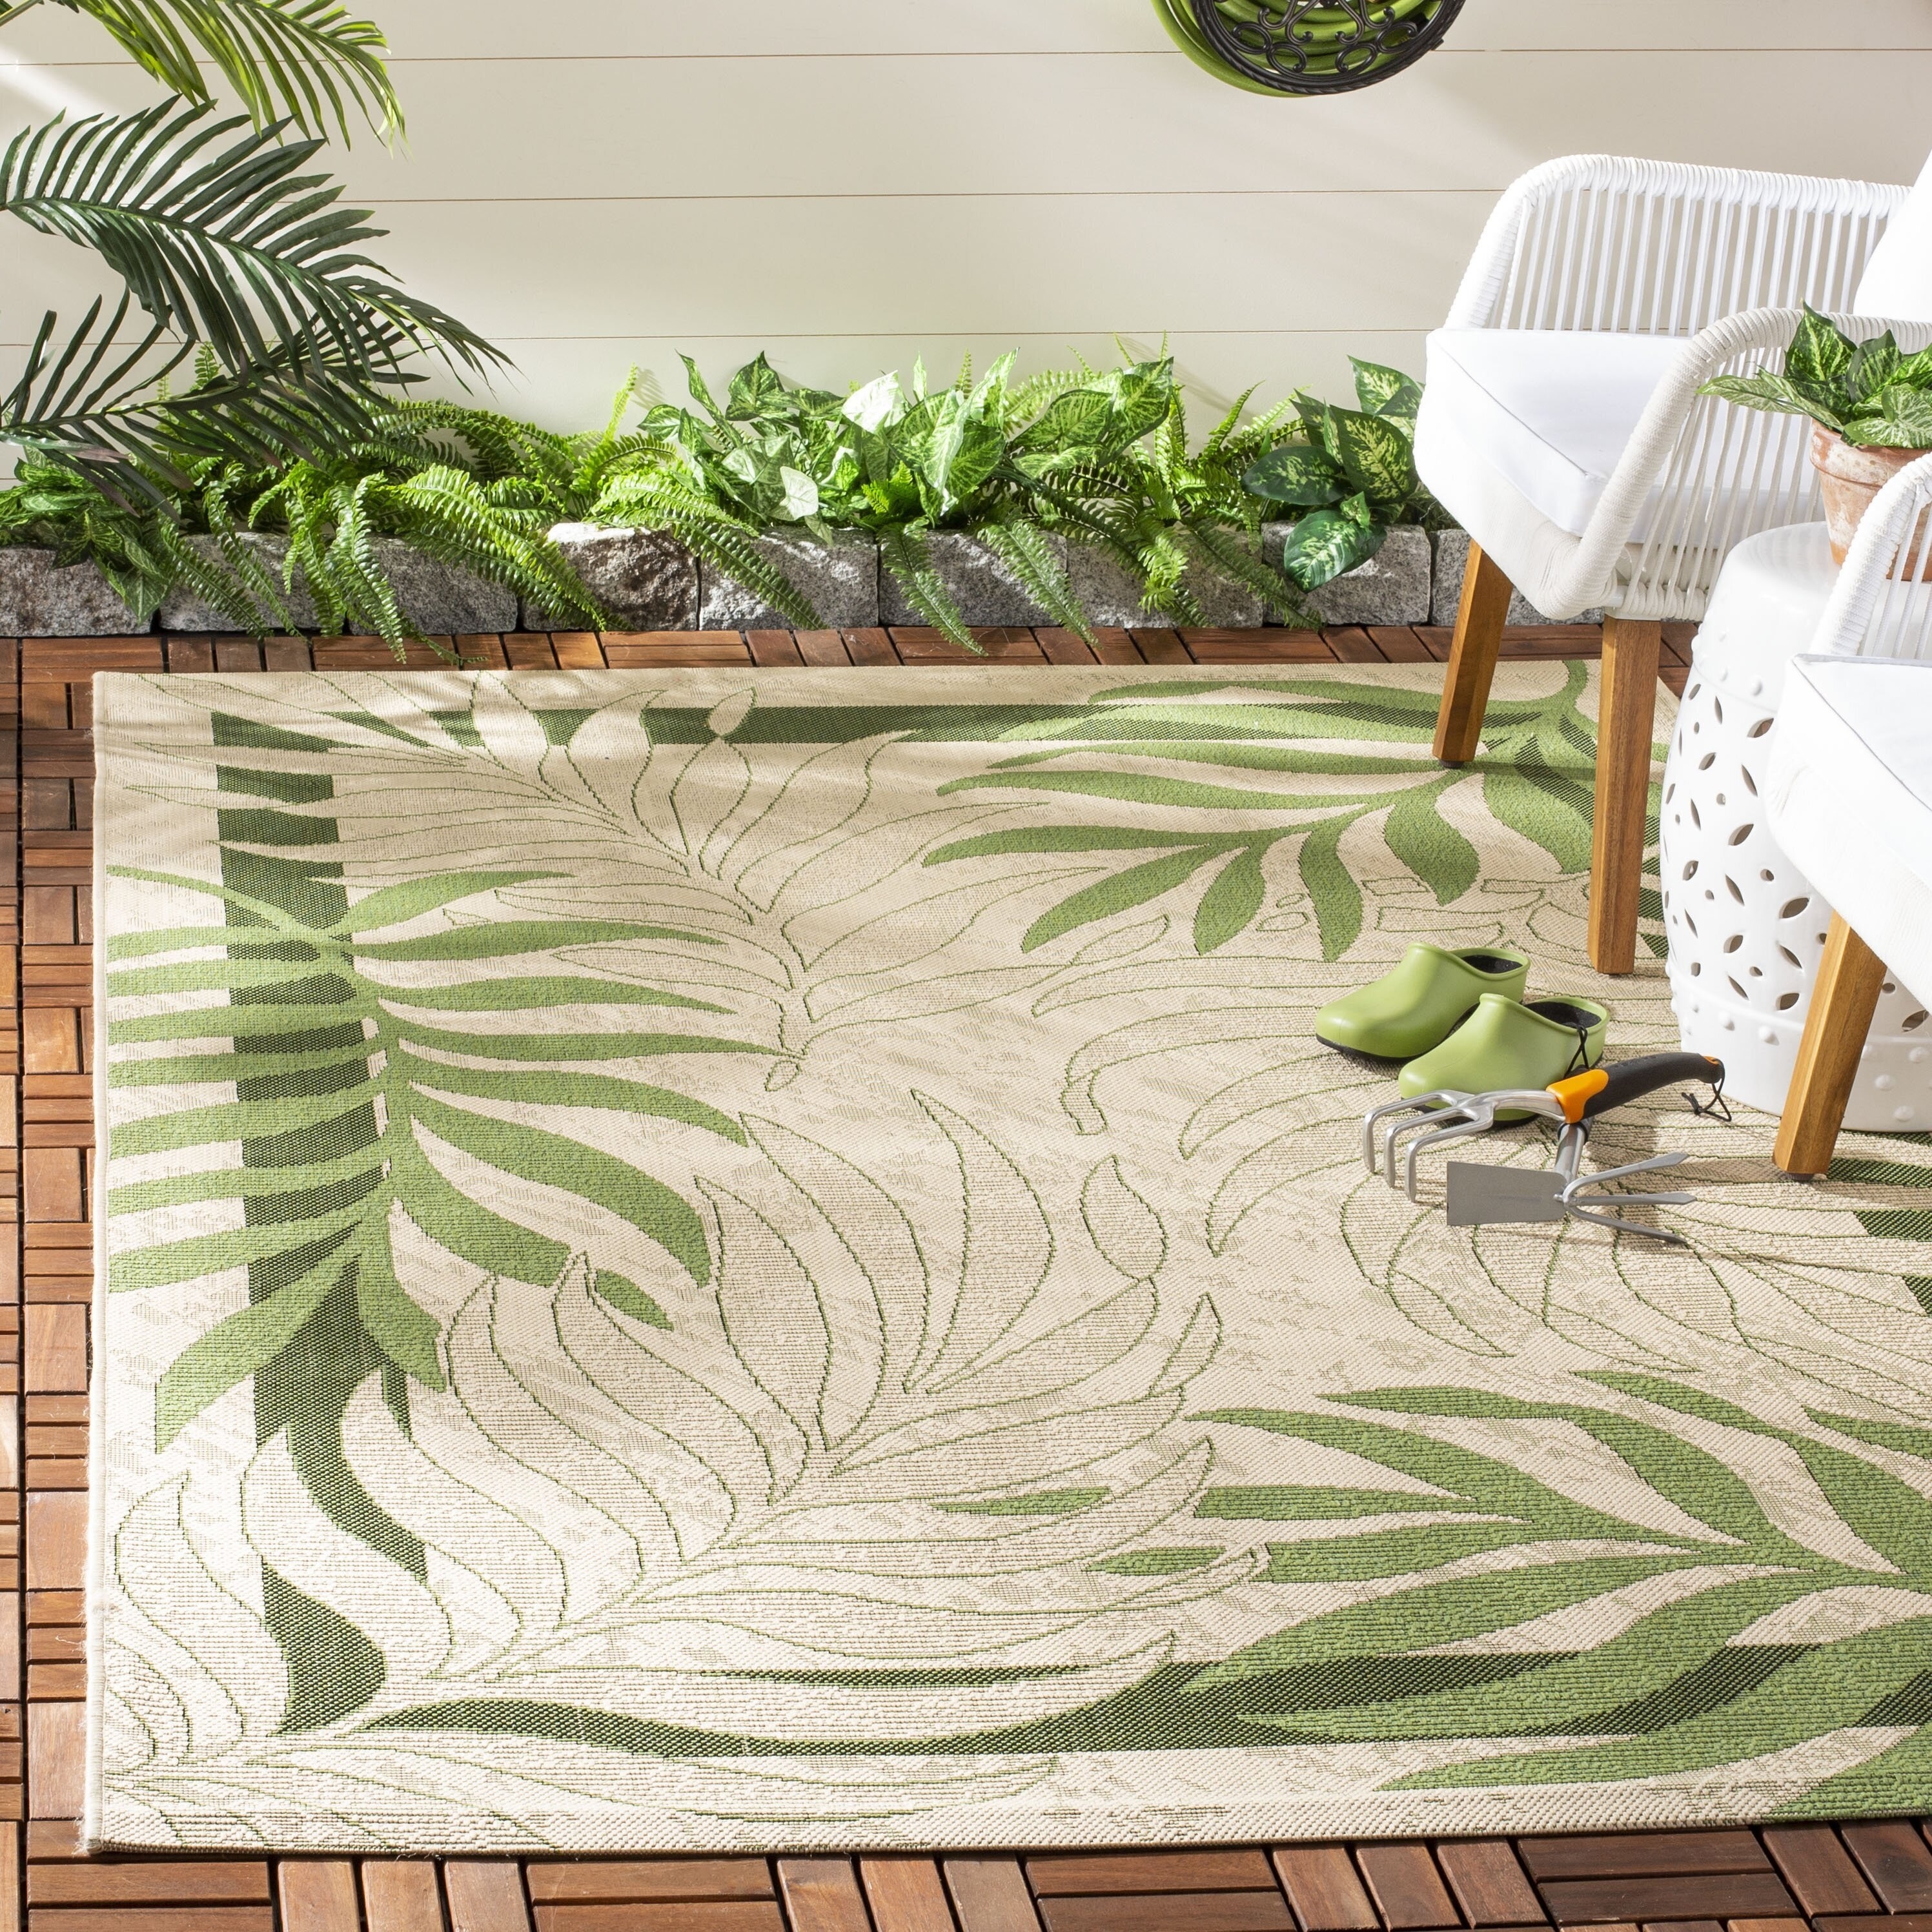 decorative rug on a patio. it has a large palm leaf pattern repeating throughout.